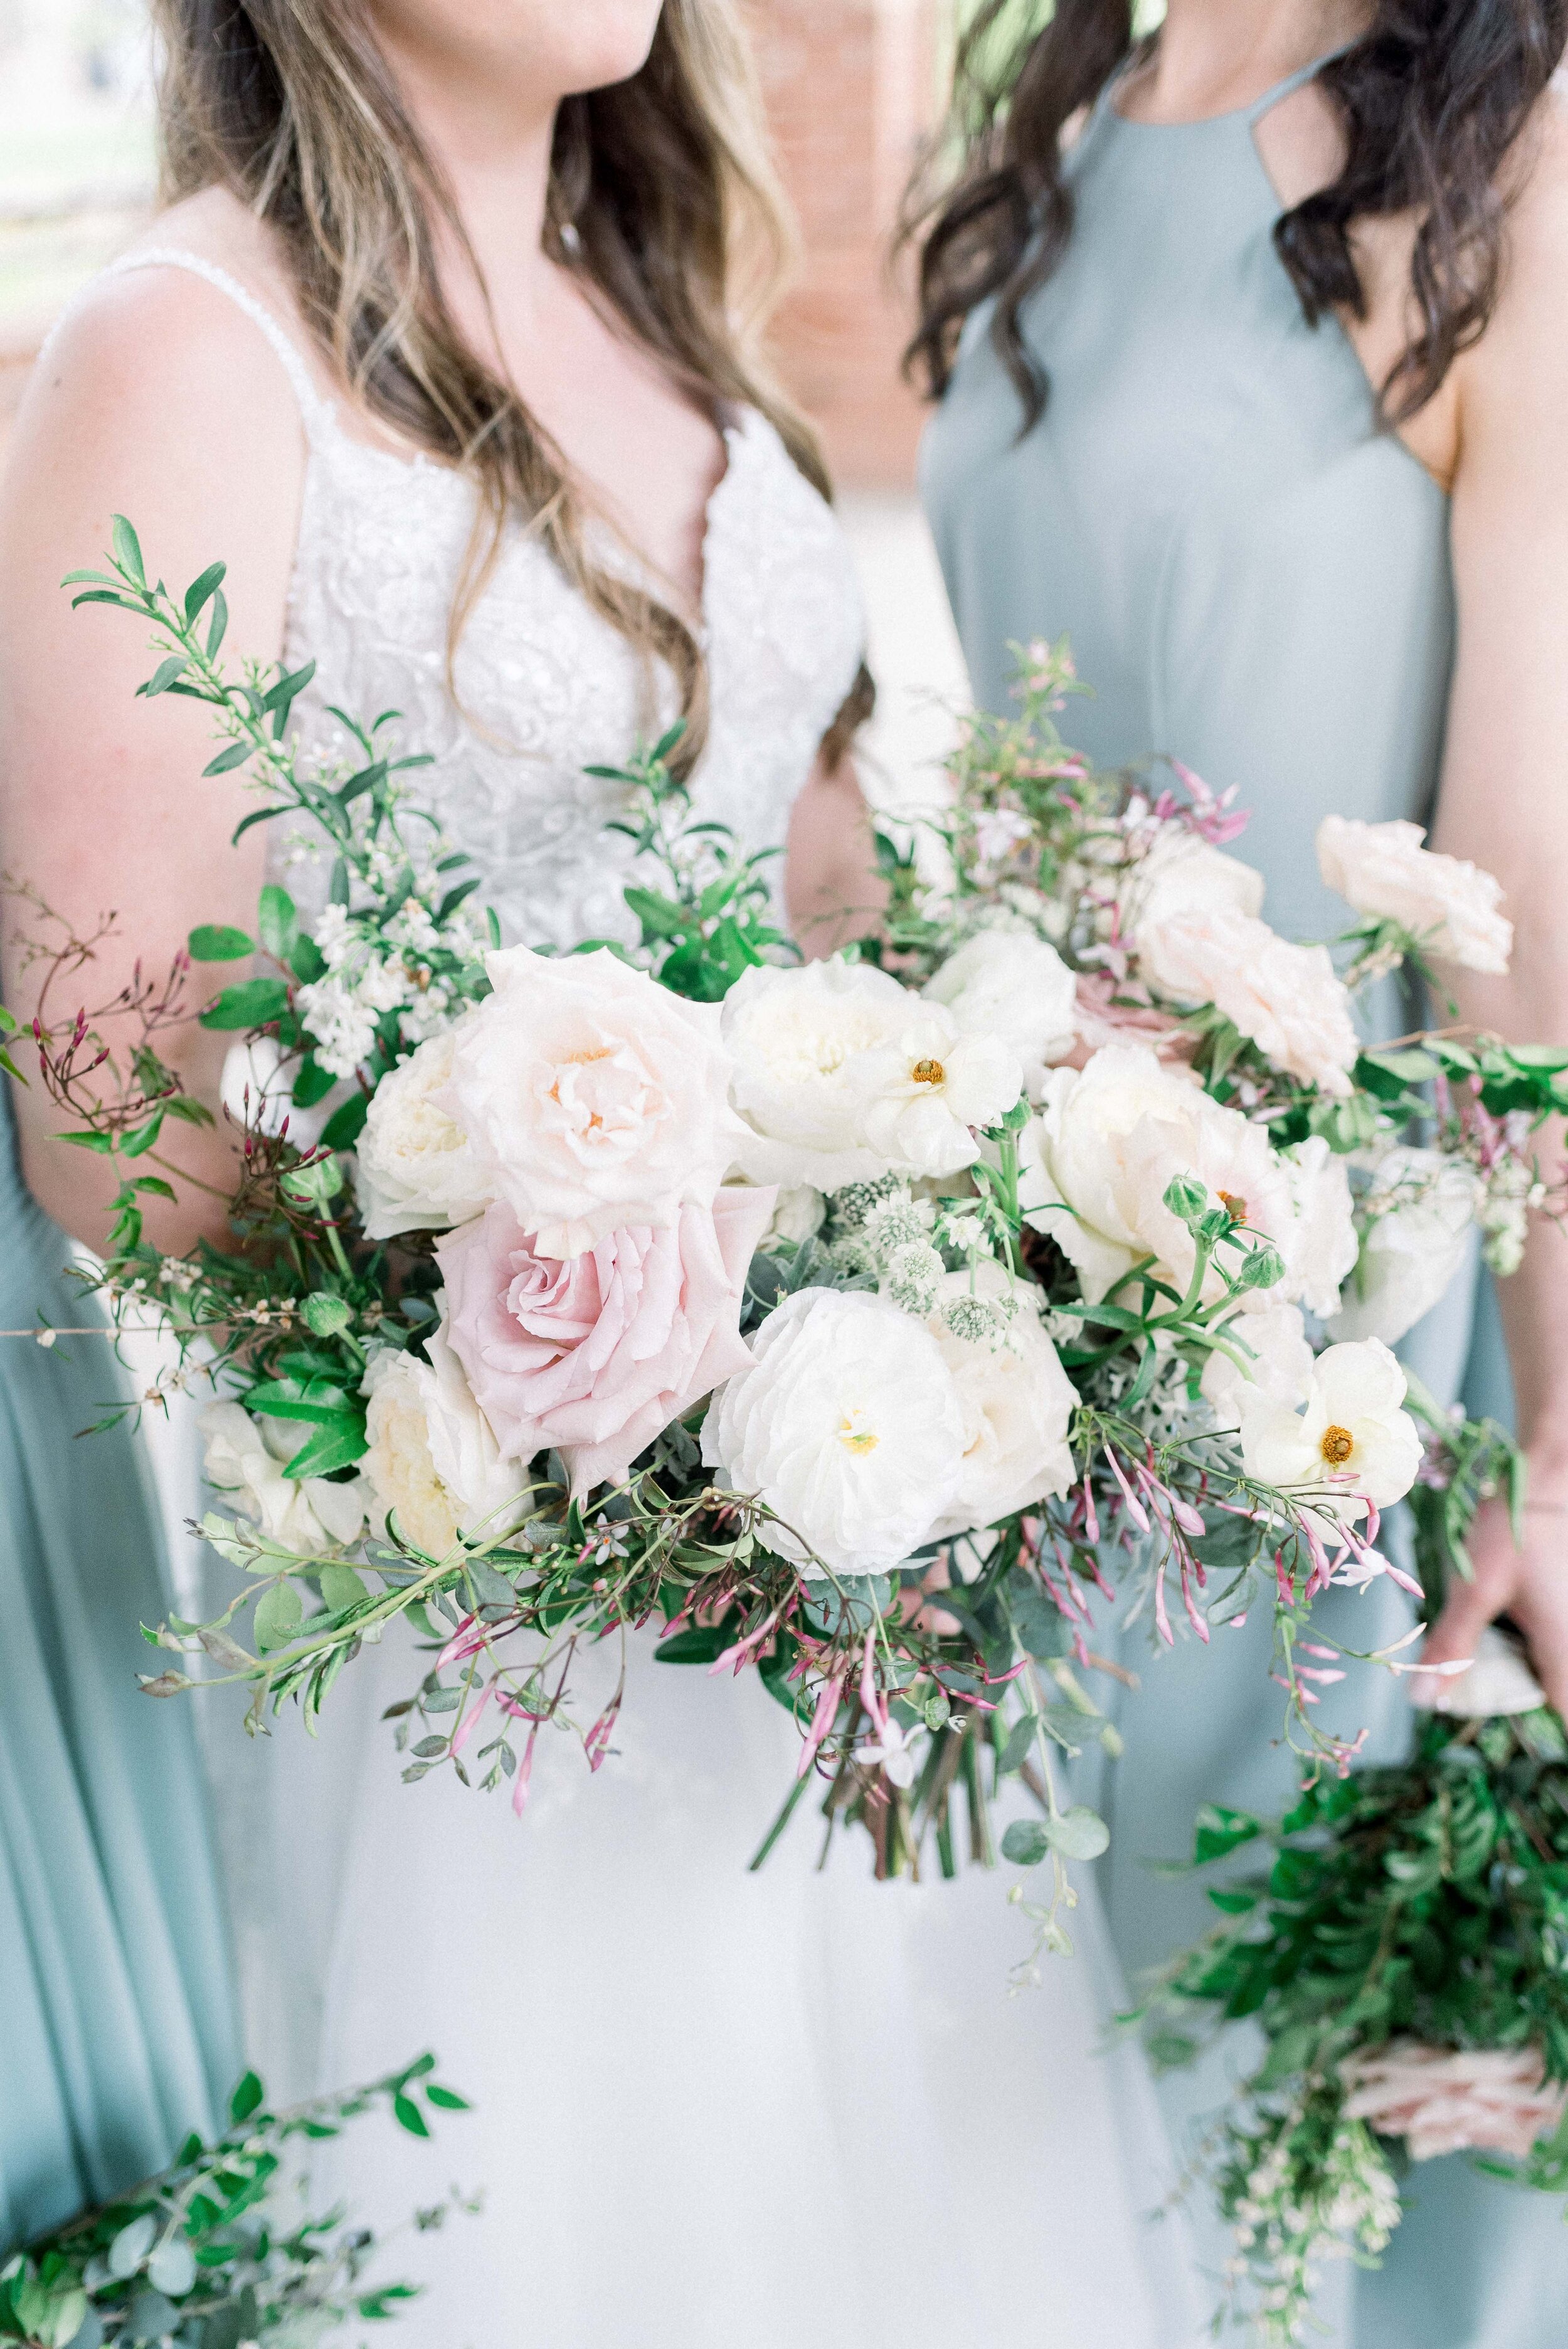 Champagne roses, cream garden roses, trailing jasmine, fluffy ranunculus, quicksand roses, majolica spray roses, and sage eucalyptus make up this gorgeous bridal bouquet. Designed by florist Rosemary & Finch in Nashville, TN.